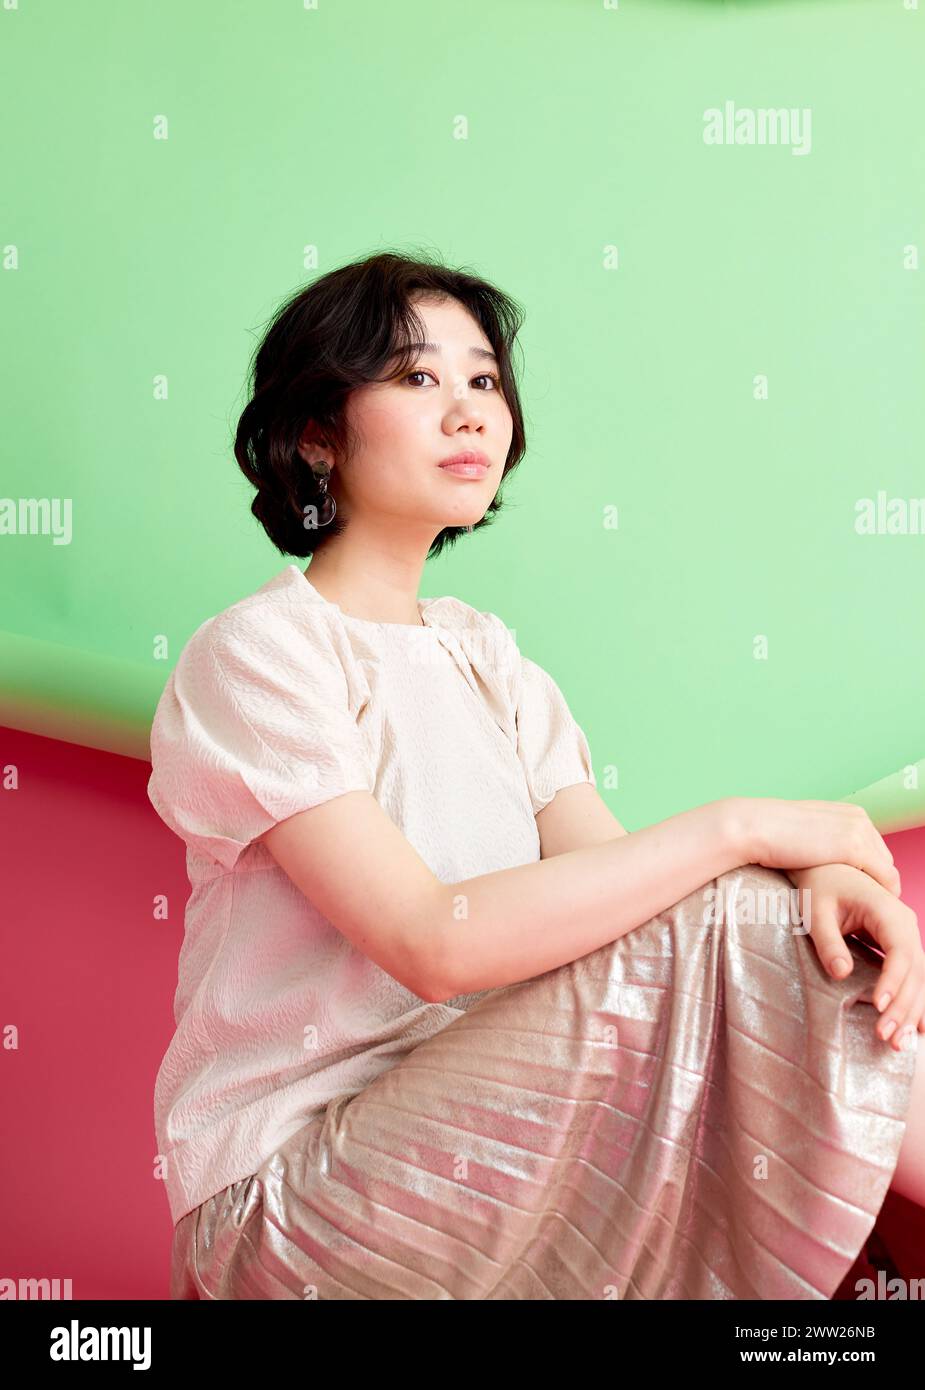 A woman sitting on a pink and green background Stock Photo